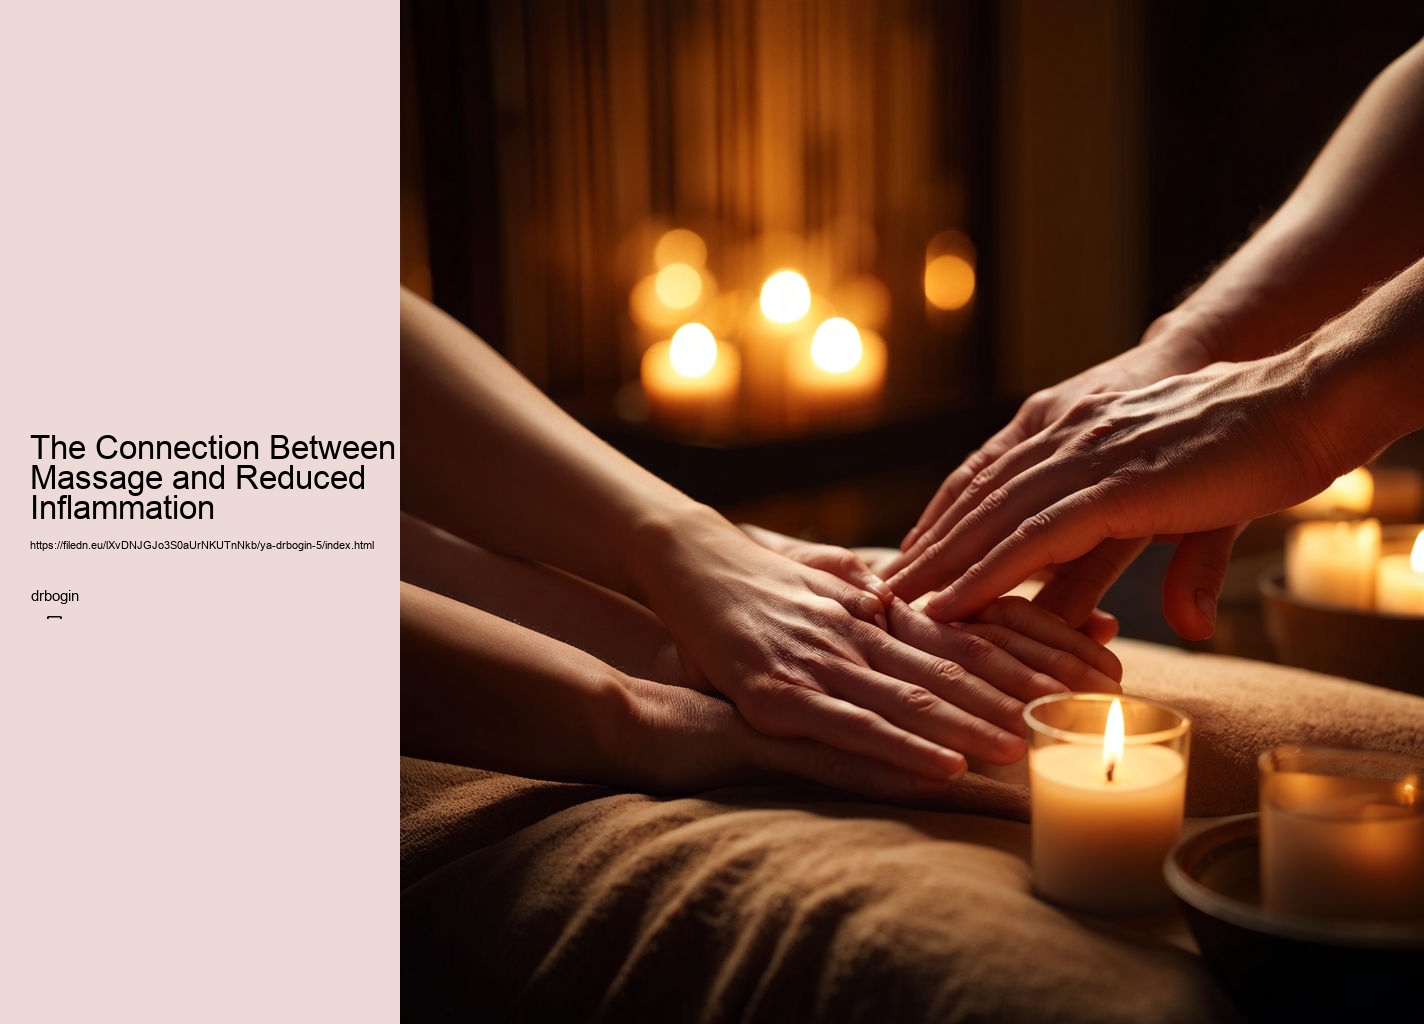 The Connection Between Massage and Reduced Inflammation